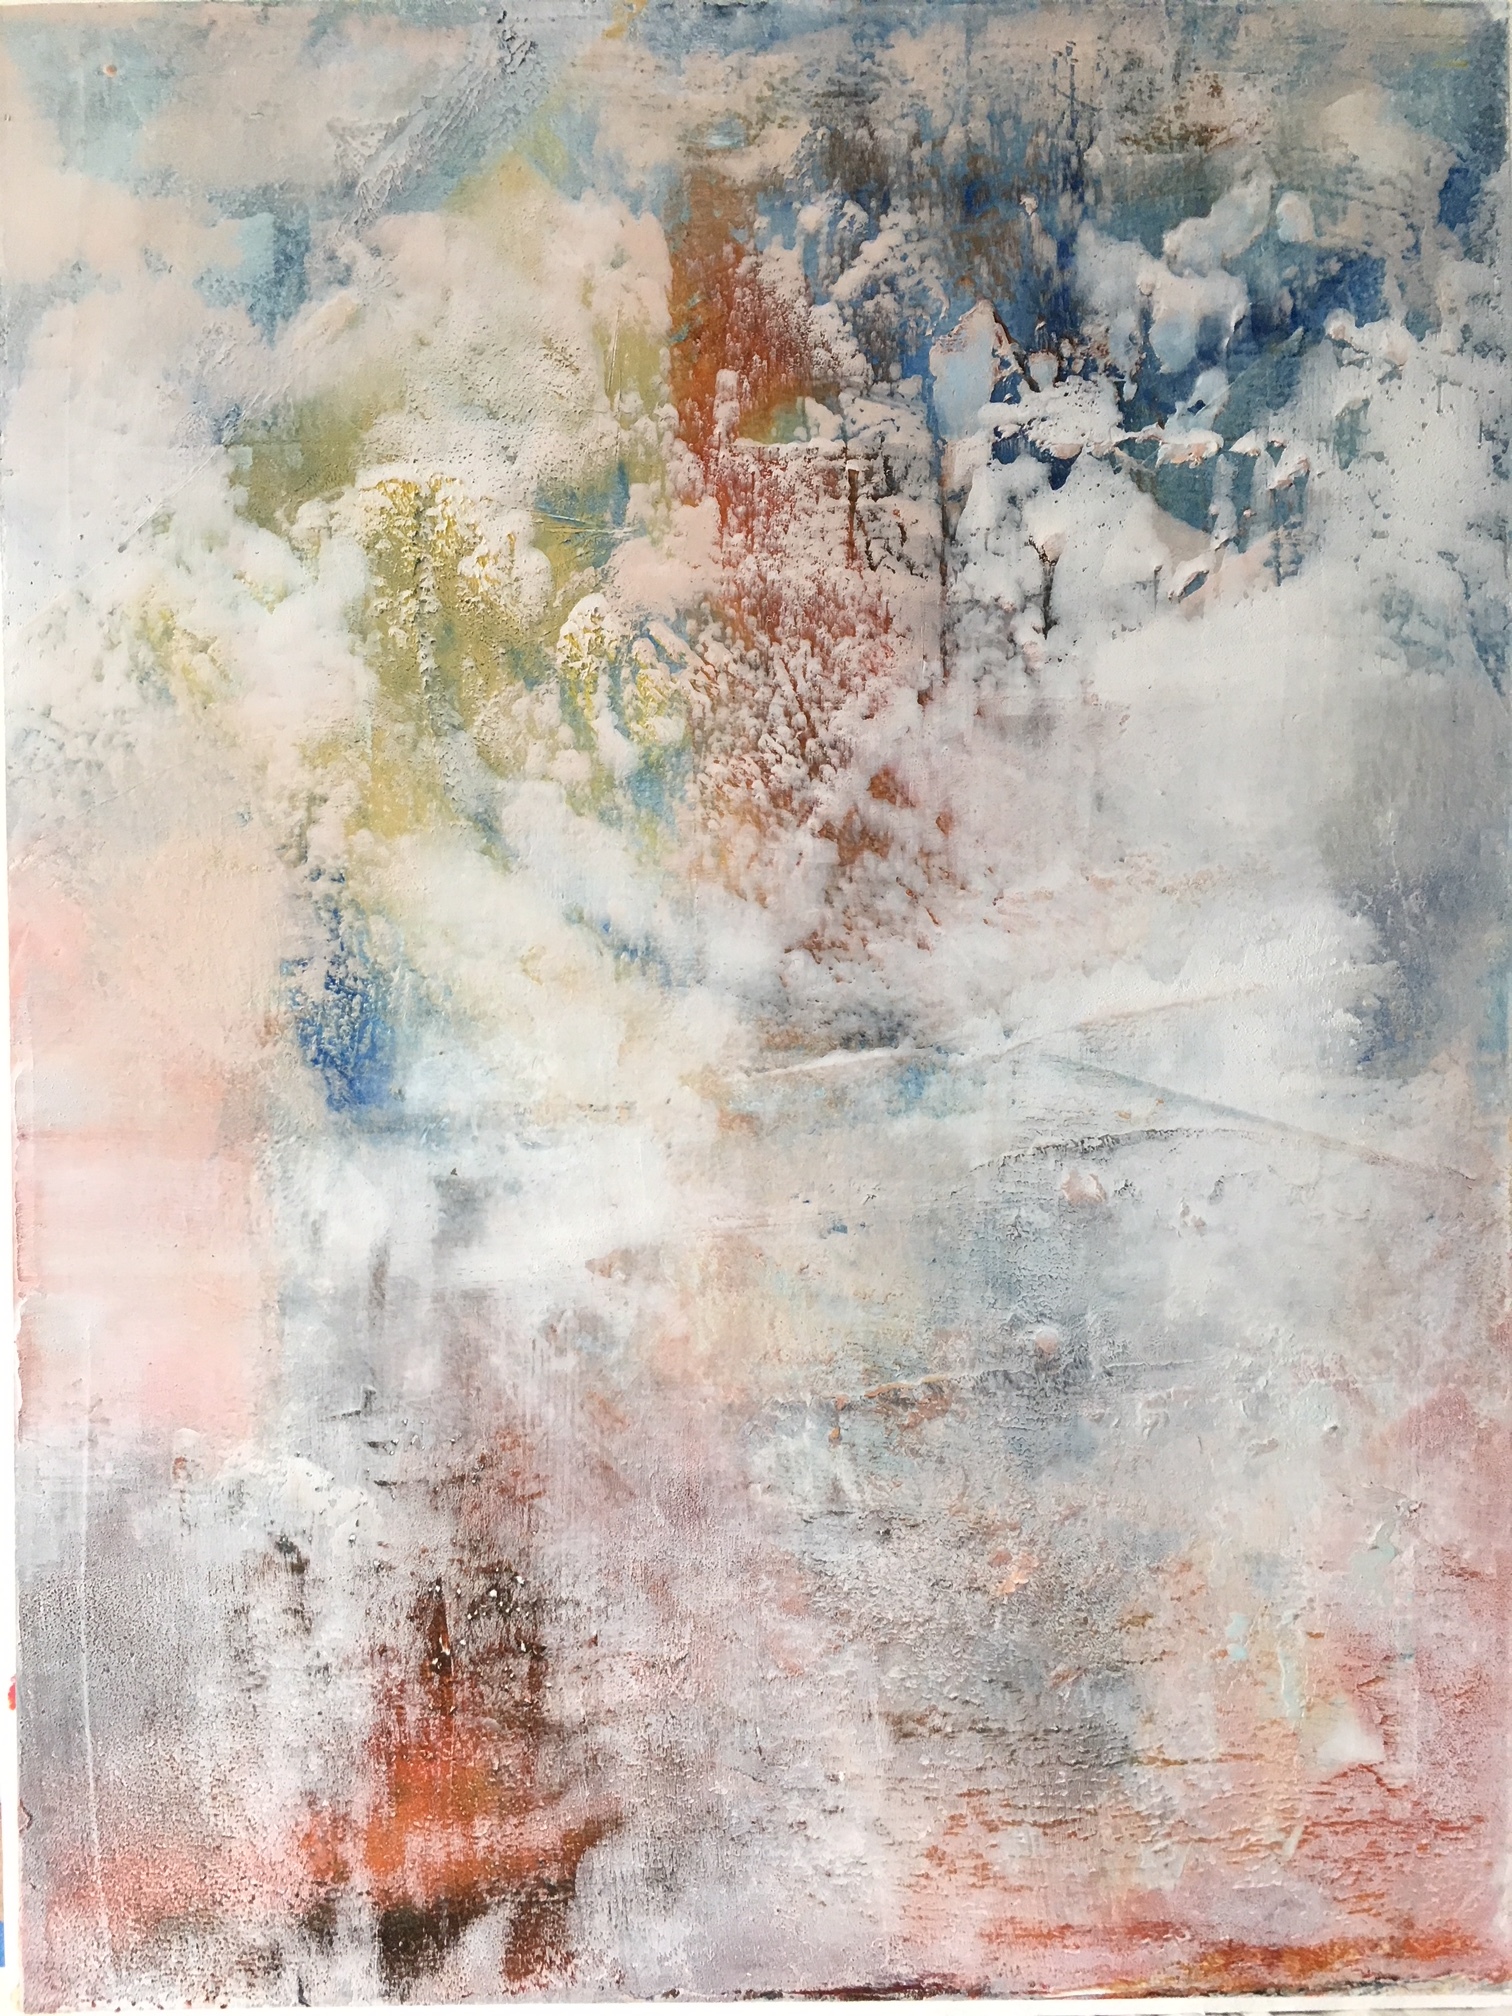 BARB SIEGELE- “The Promise” Cold wax and oil pigment, 12x16  $325.00